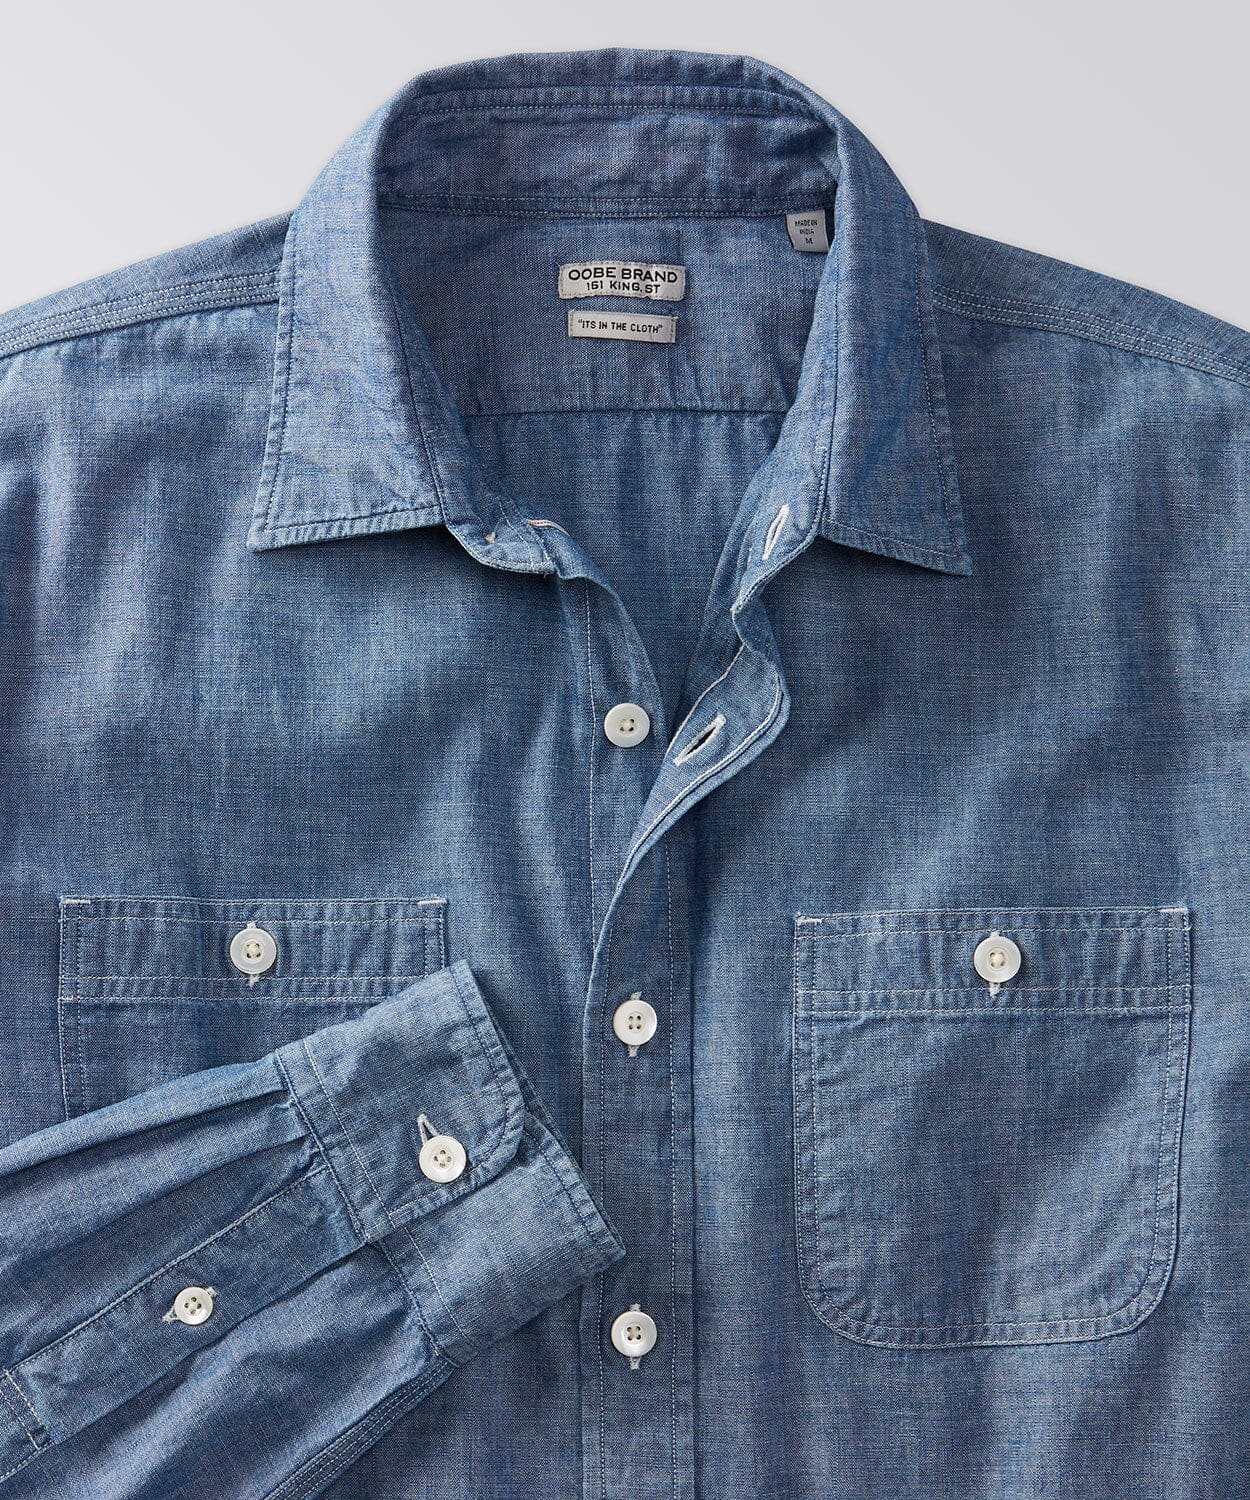 Marlan Chambray Workshirt Button Downs OOBE BRAND 